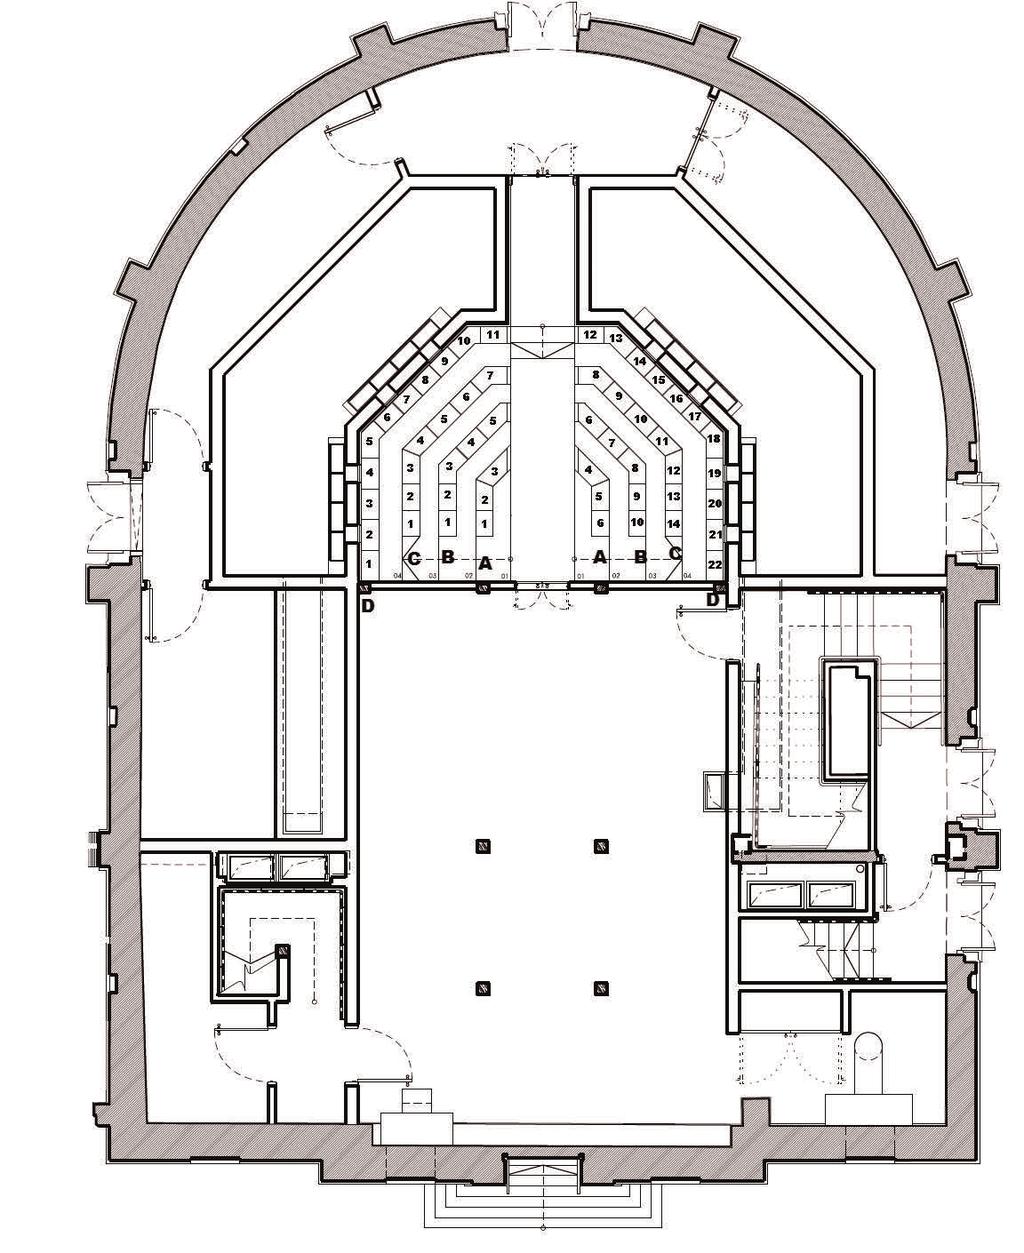 Sam Wanamaker Playhouse Seating Plan: Pit Stage steps up from ground level to row D Emergency Exit Only D 1 0 19 C B A A B C